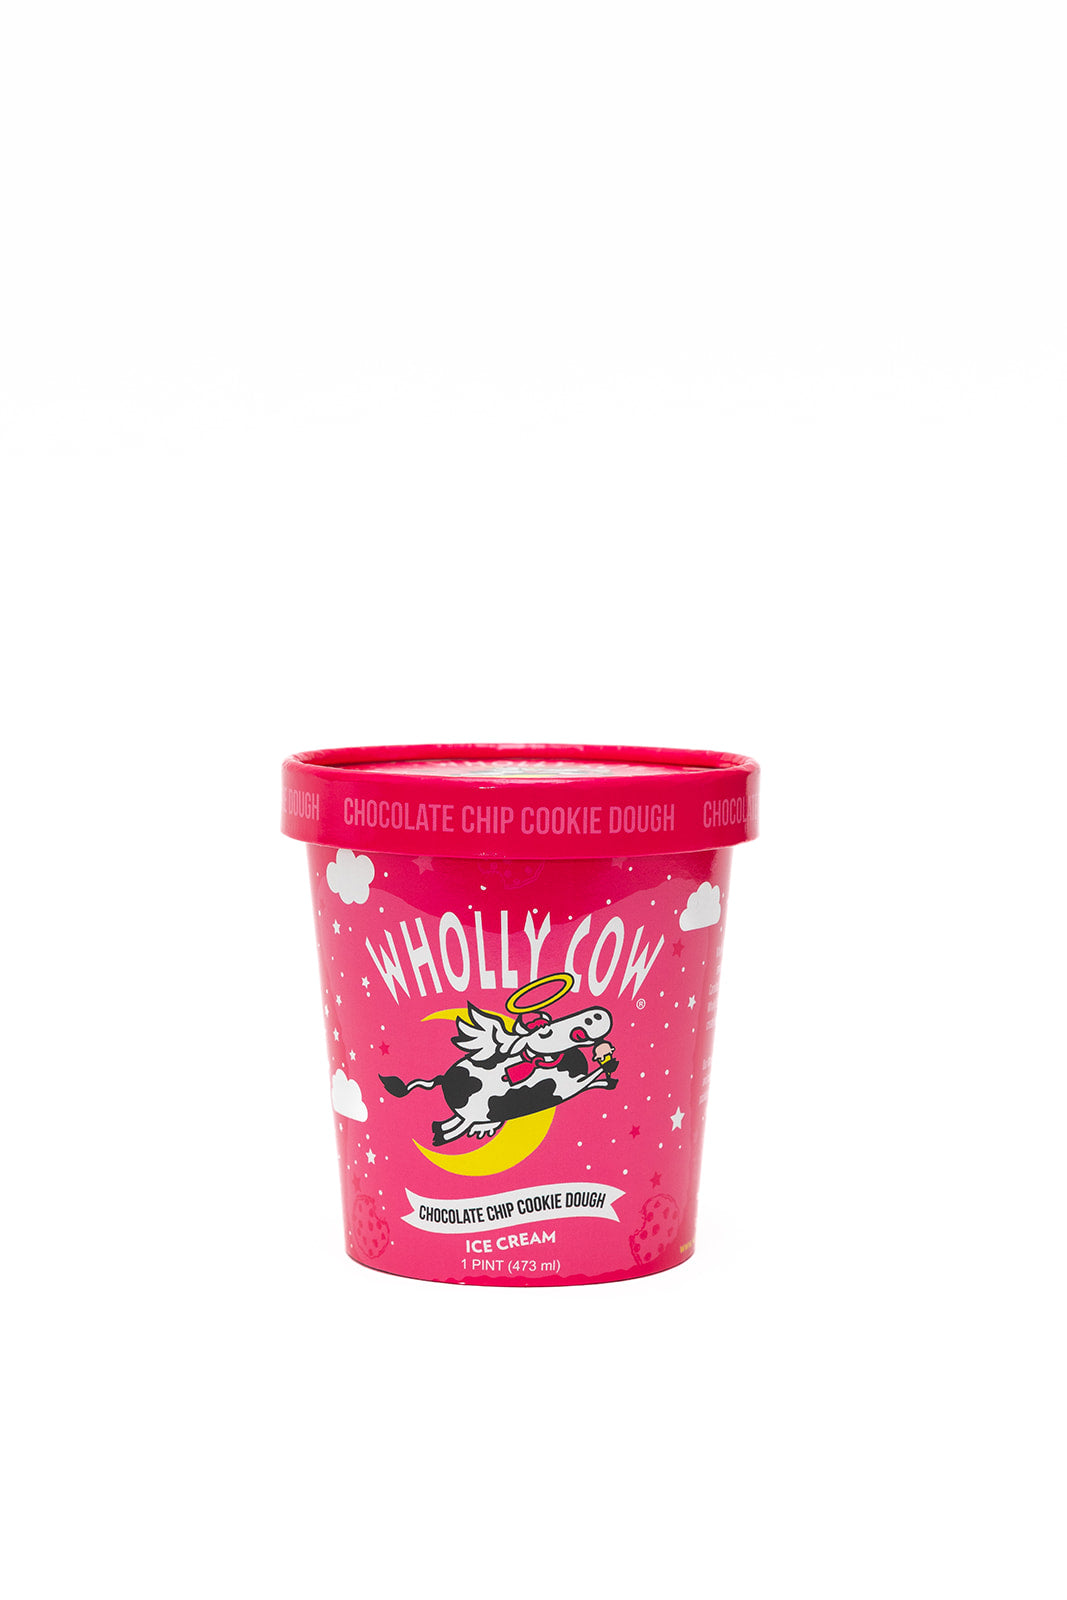 Wholly Cow local Ice Cream Chocolate Chip Cookie Dough pint container flavor Charleston South Carolina